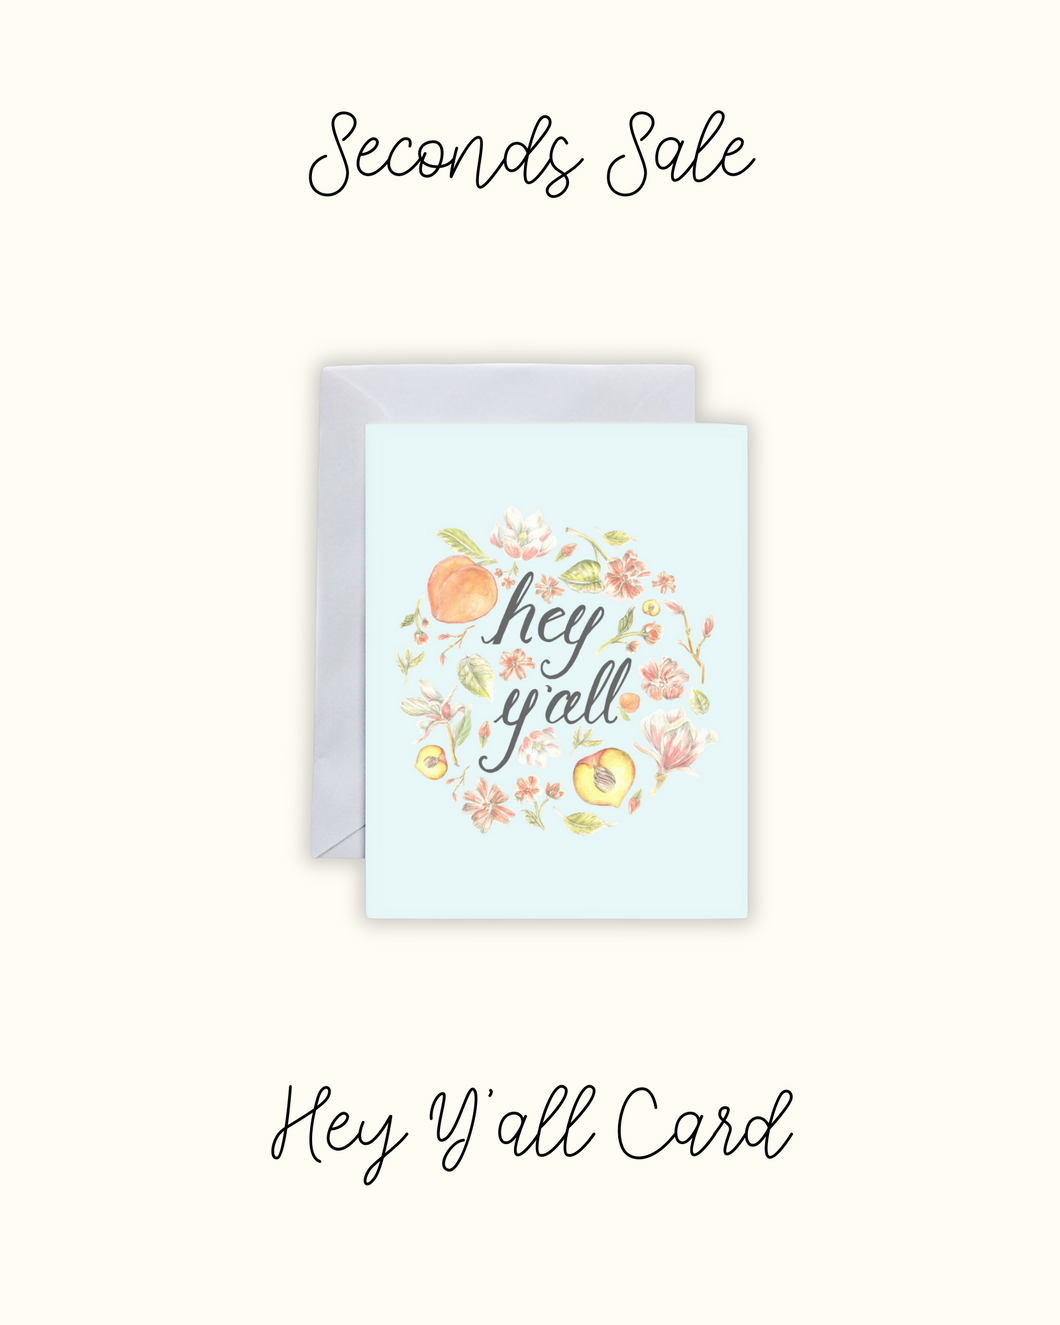 Hey Y'all Card- Seconds Sale